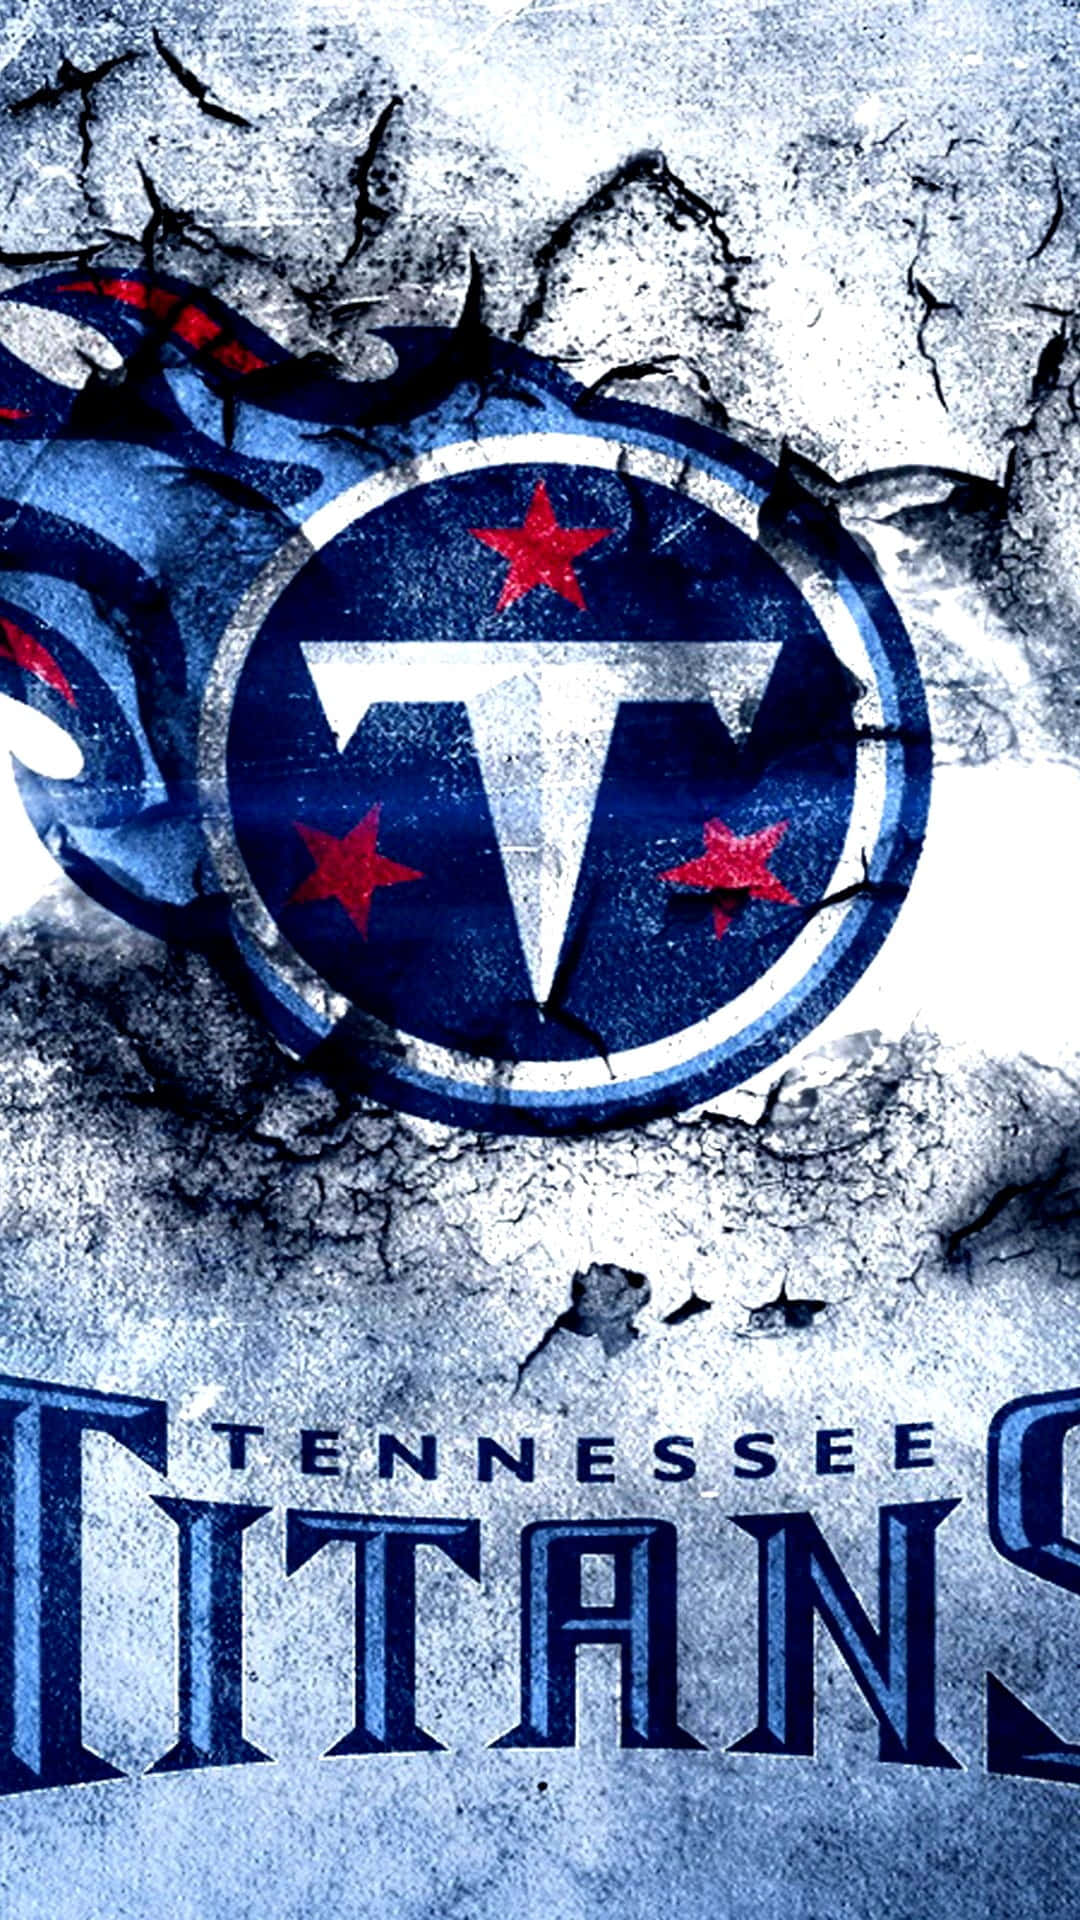 Represent your Titans with this sleek and official Tennessee Titans wallpaper for your iPhone. Wallpaper